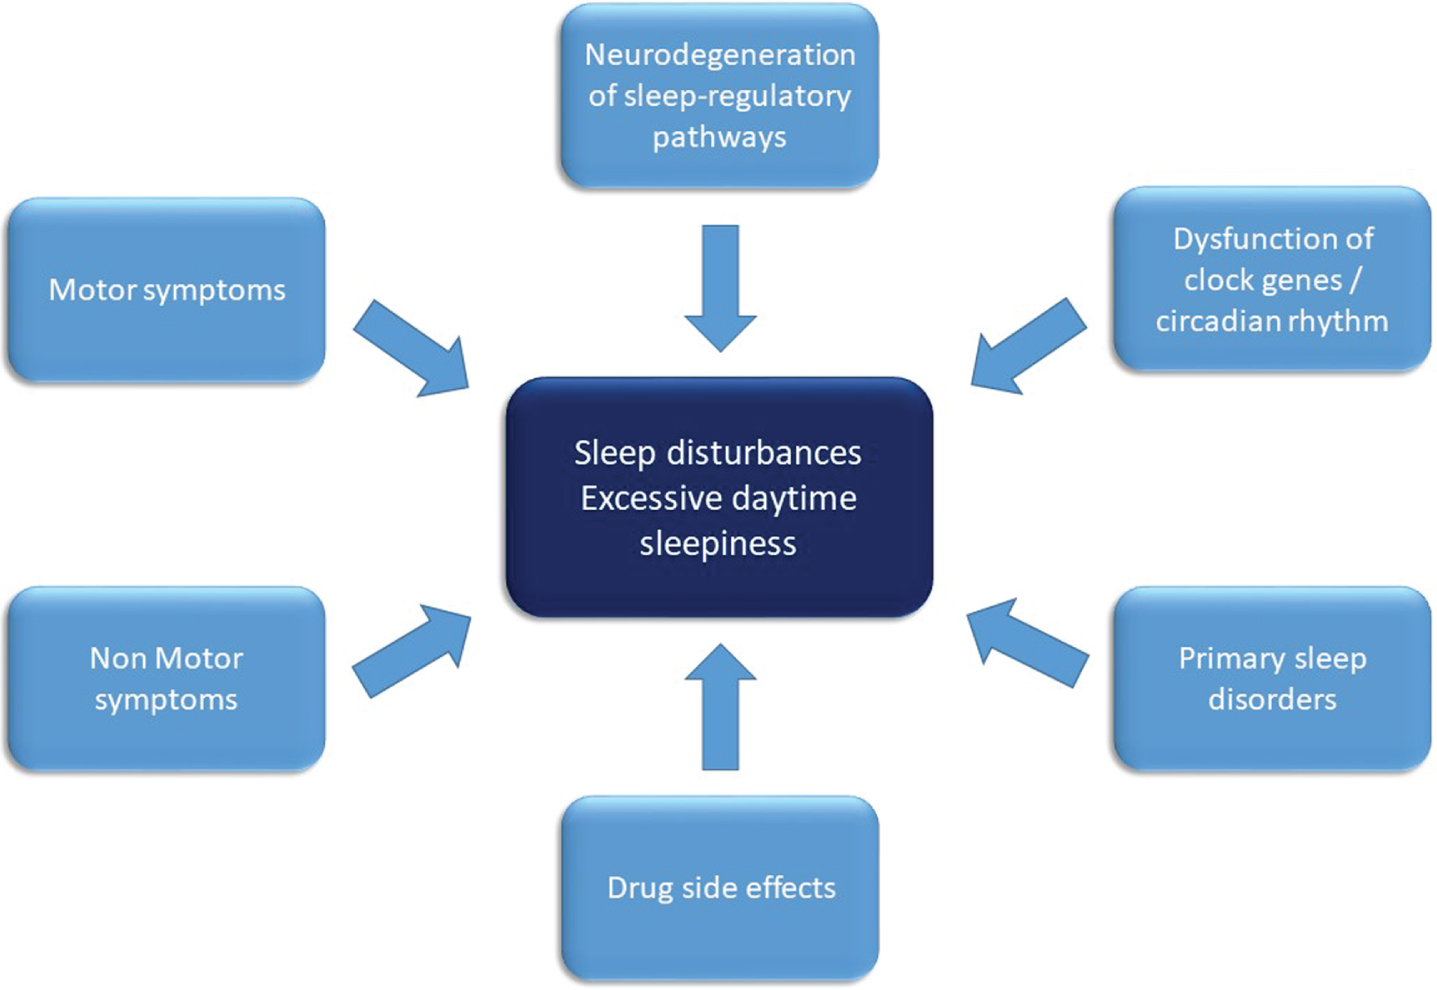 Overview on factors contributing to sleep disruption in Parkinson’s disease. Factors contributing to the pathophysiology of sleep disturbances and excessive daytime sleepiness in Parkinson’s disease comprise of disintegration of sleep regulatory circuits and neurotransmitters as well as circadian rhythms by the neurodegenerative disease process. Nighttime sleep is disrupted by motor symptoms (such as akinesia, tremor), non-motor-symptoms such as autonomic or neuropsychiatric symptoms and drug side effects. Furthermore, primary sleep disorders such as restless legs syndrome and sleep disordered breathing contribute to nighttime and daytime impairment.